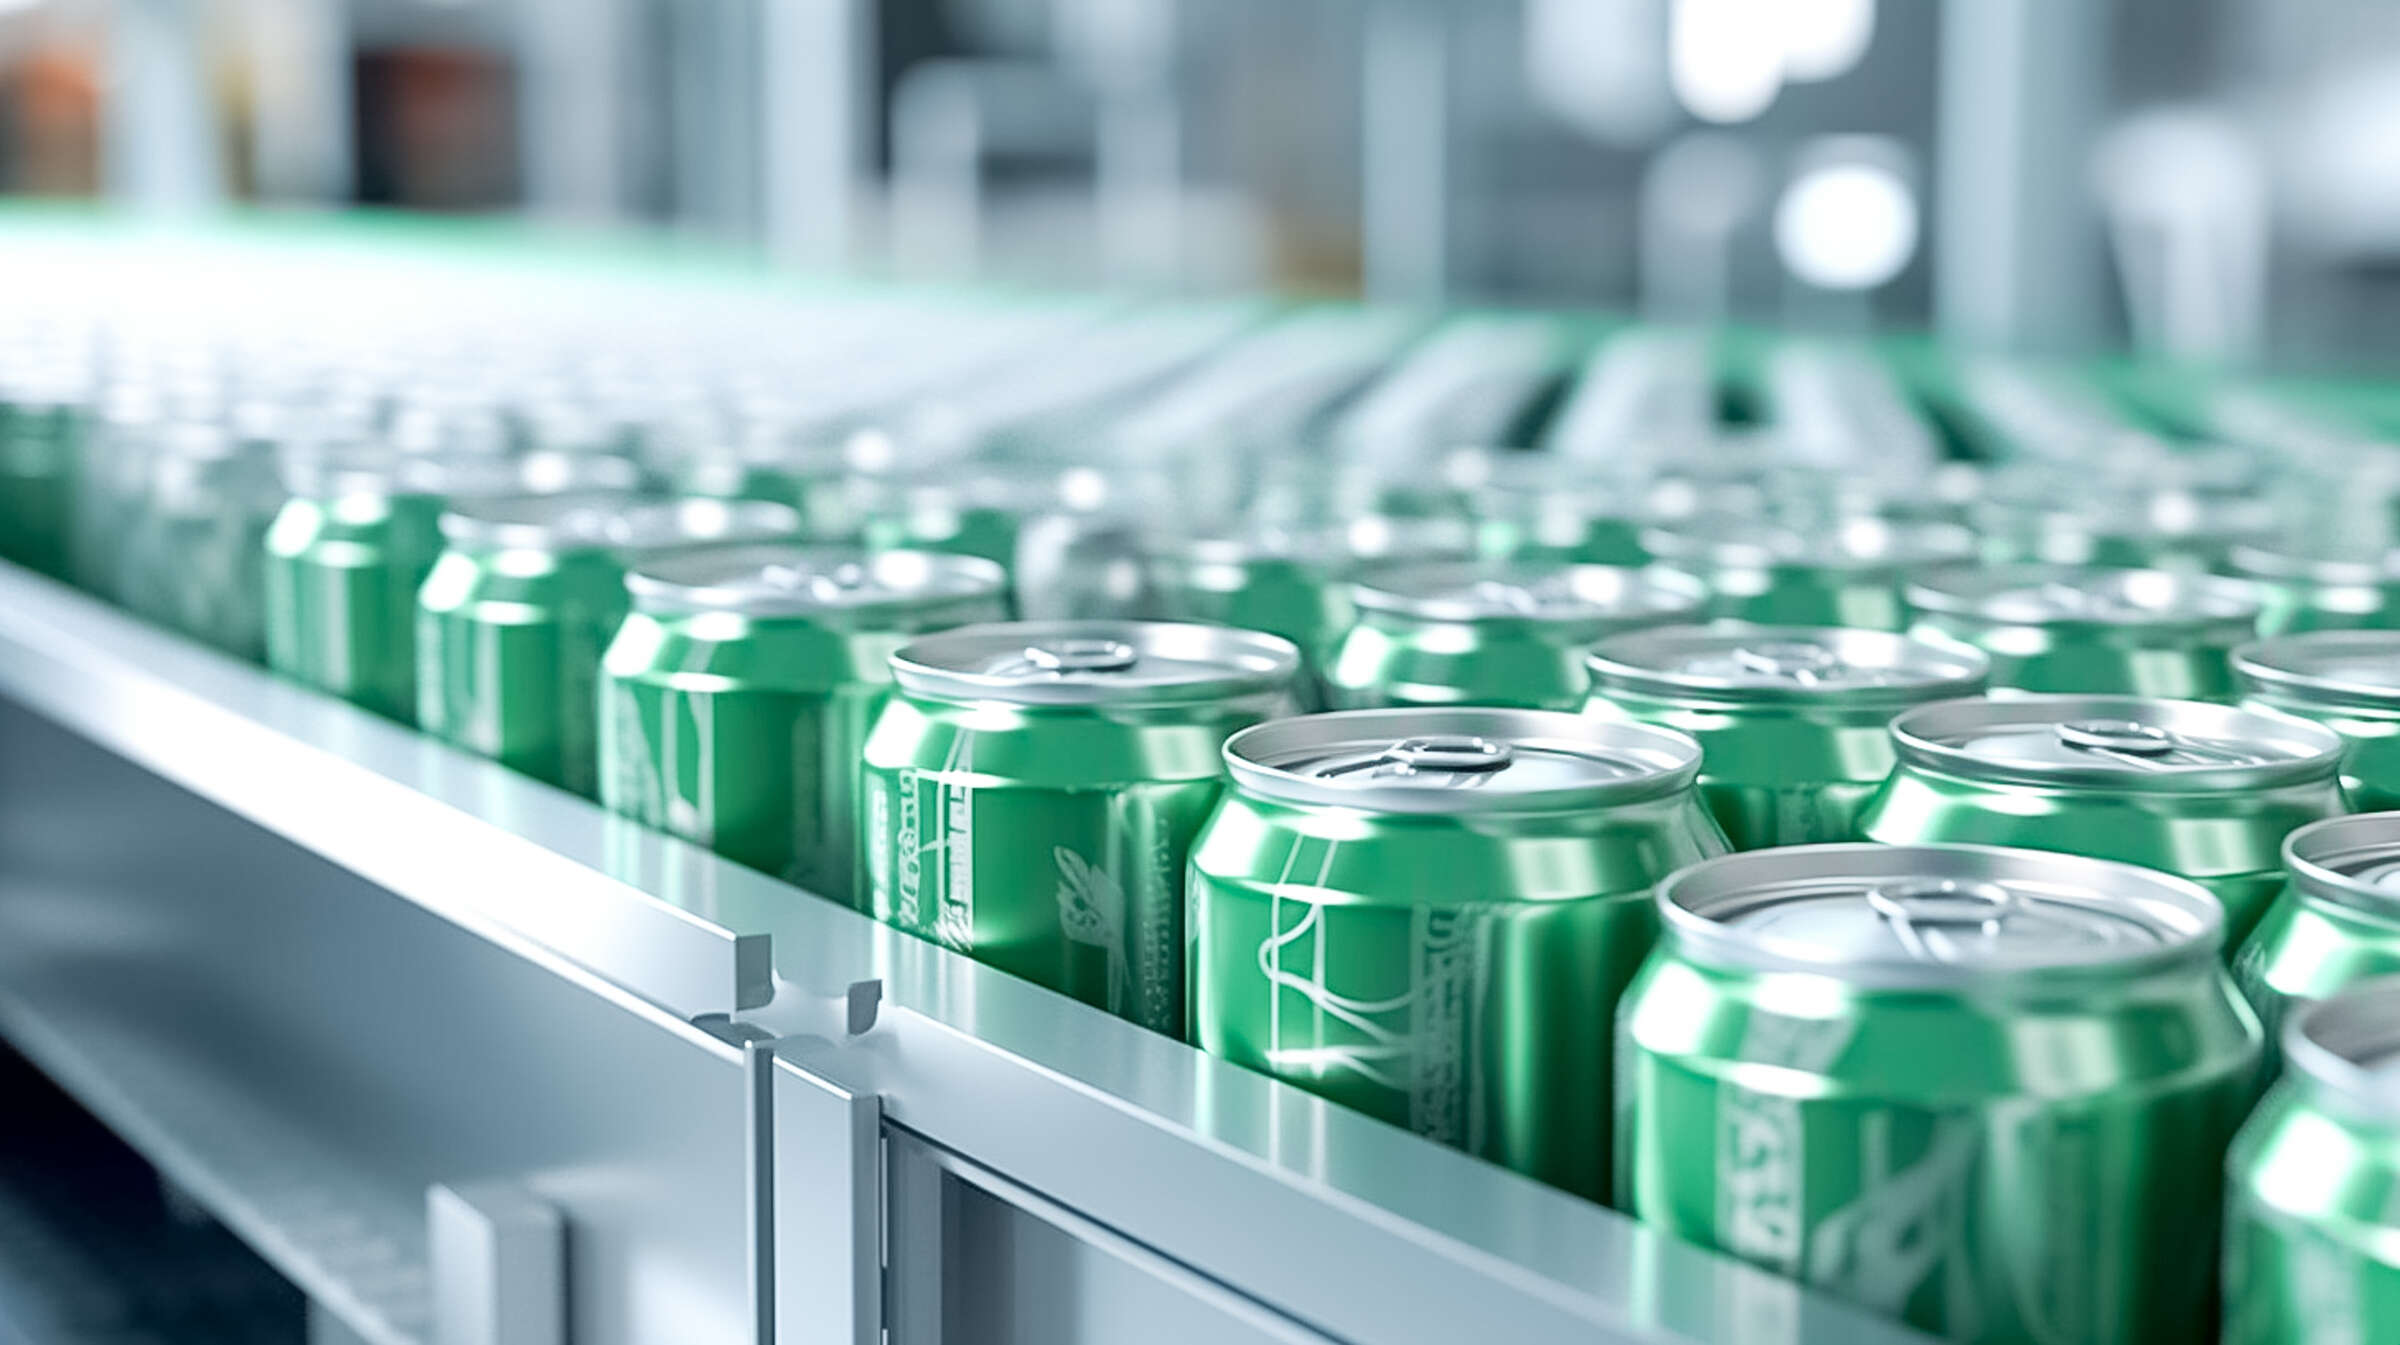 Background image: Tehnological advancements in food and beverage manufacturing